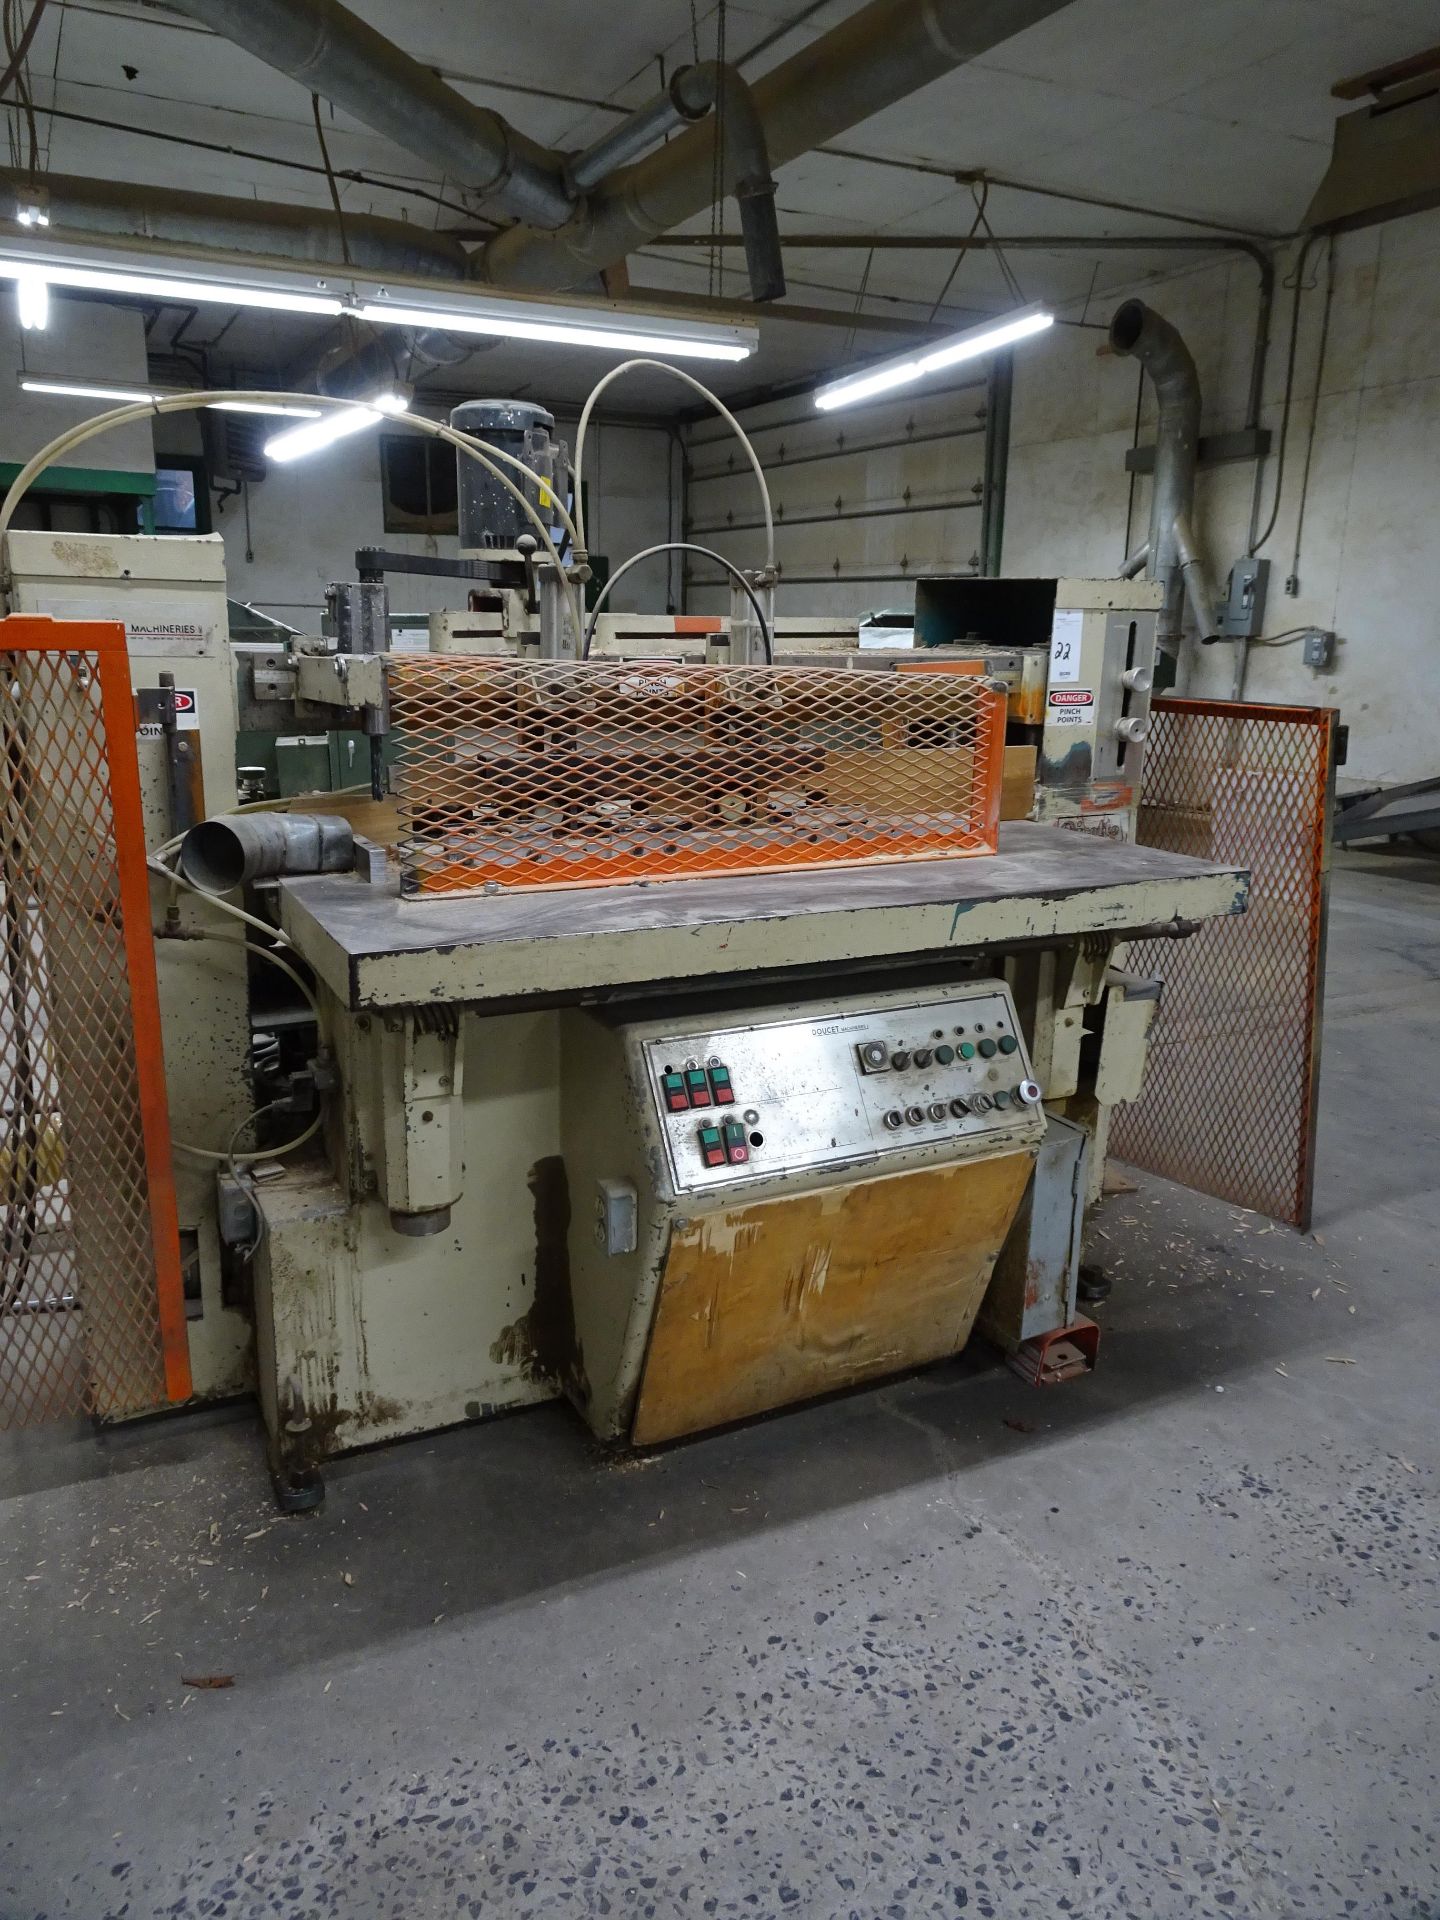 Doucet Combined Vertical-Horizontal Boring Machine - Image 2 of 6